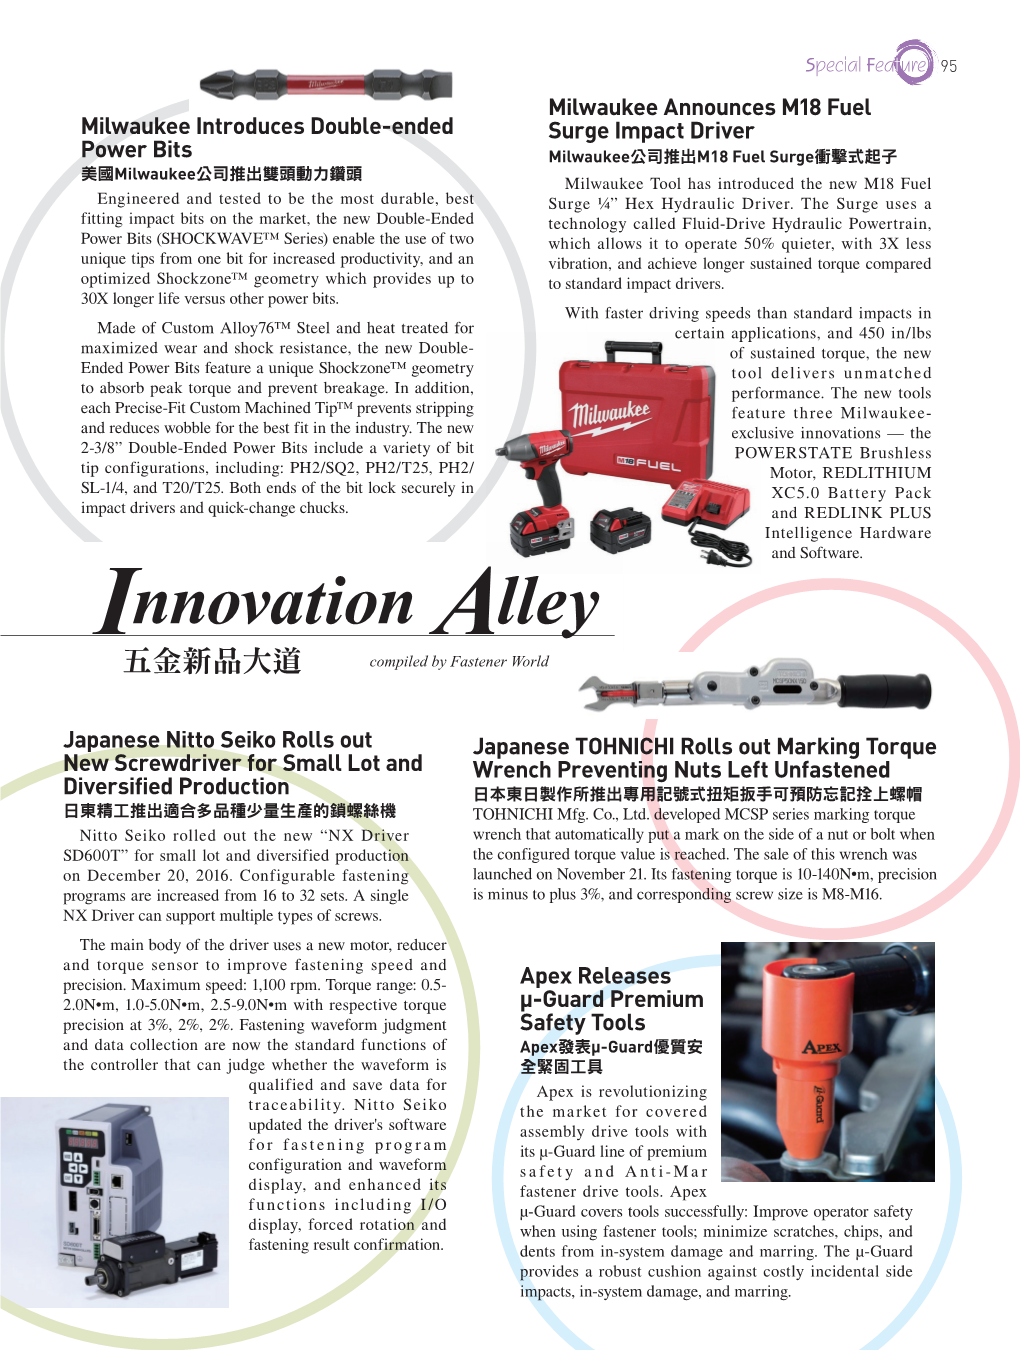 Innovation Alley 五金新品大道 Compiled by Fastener World